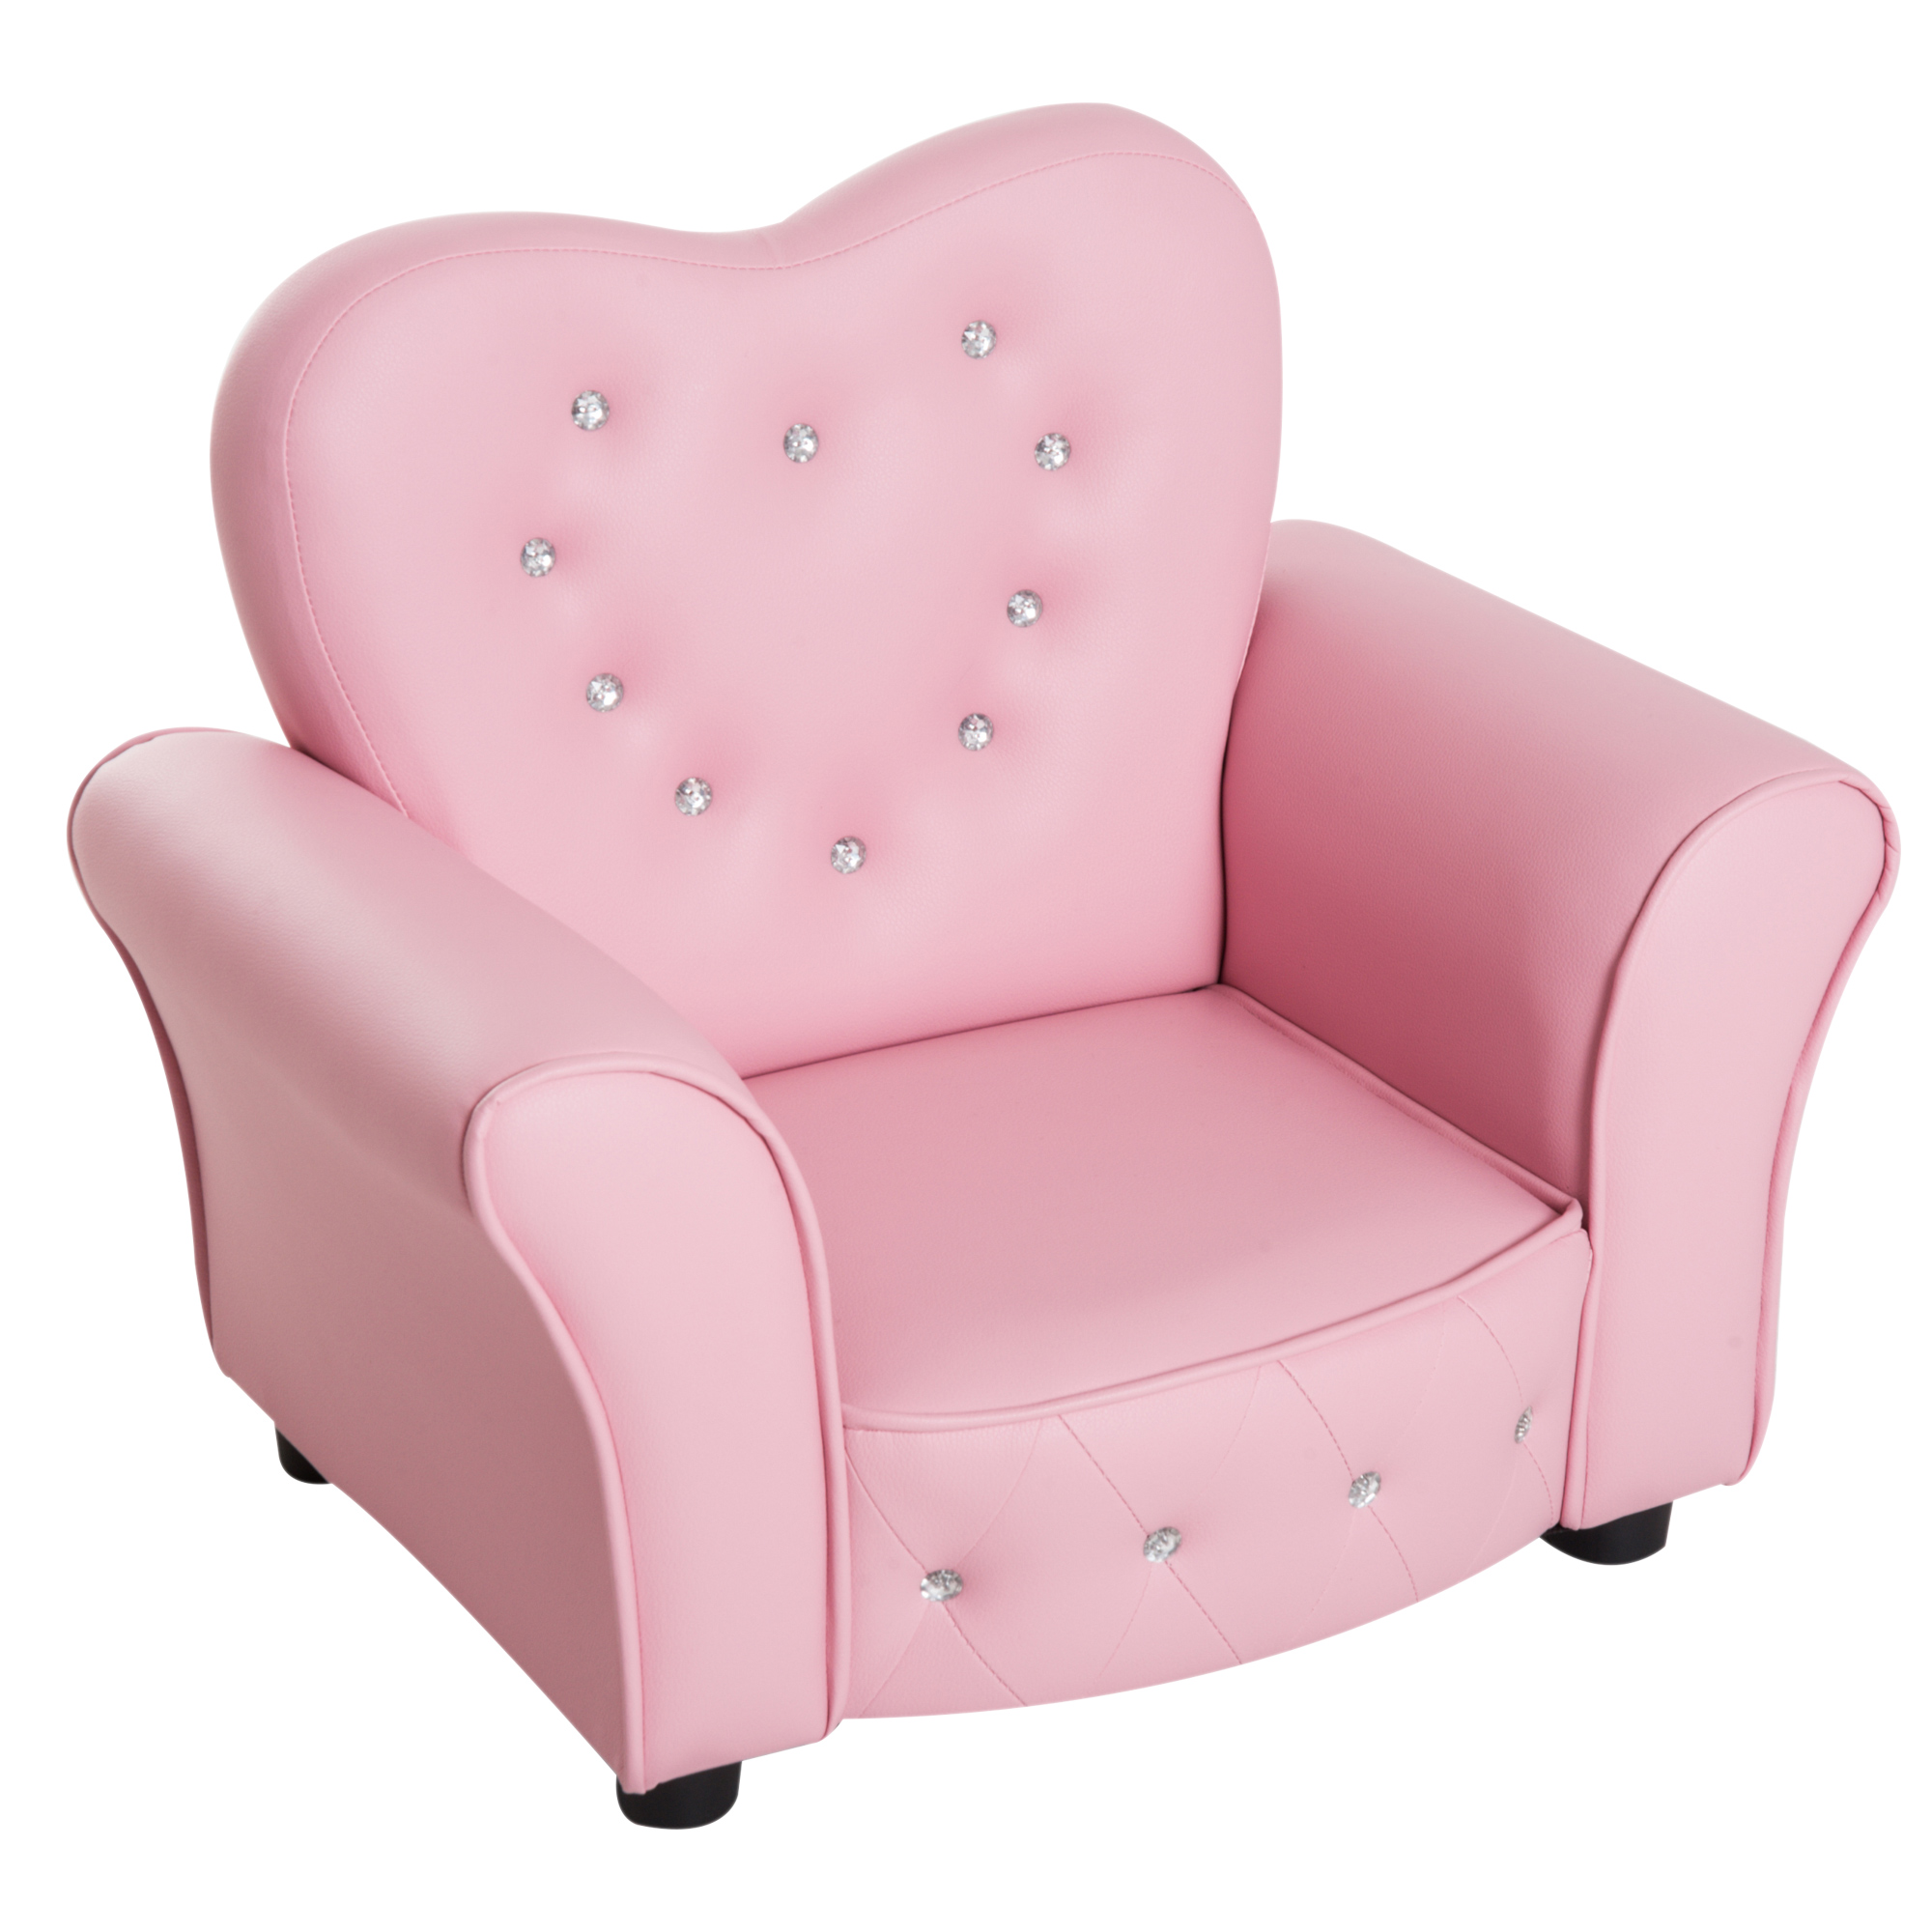 Qaba Kids Sofa Toddler Tufted Upholstered Sofa Chair Princess Couch Furniture with Diamond Decoration for Preschool Child, Pink - image 1 of 9